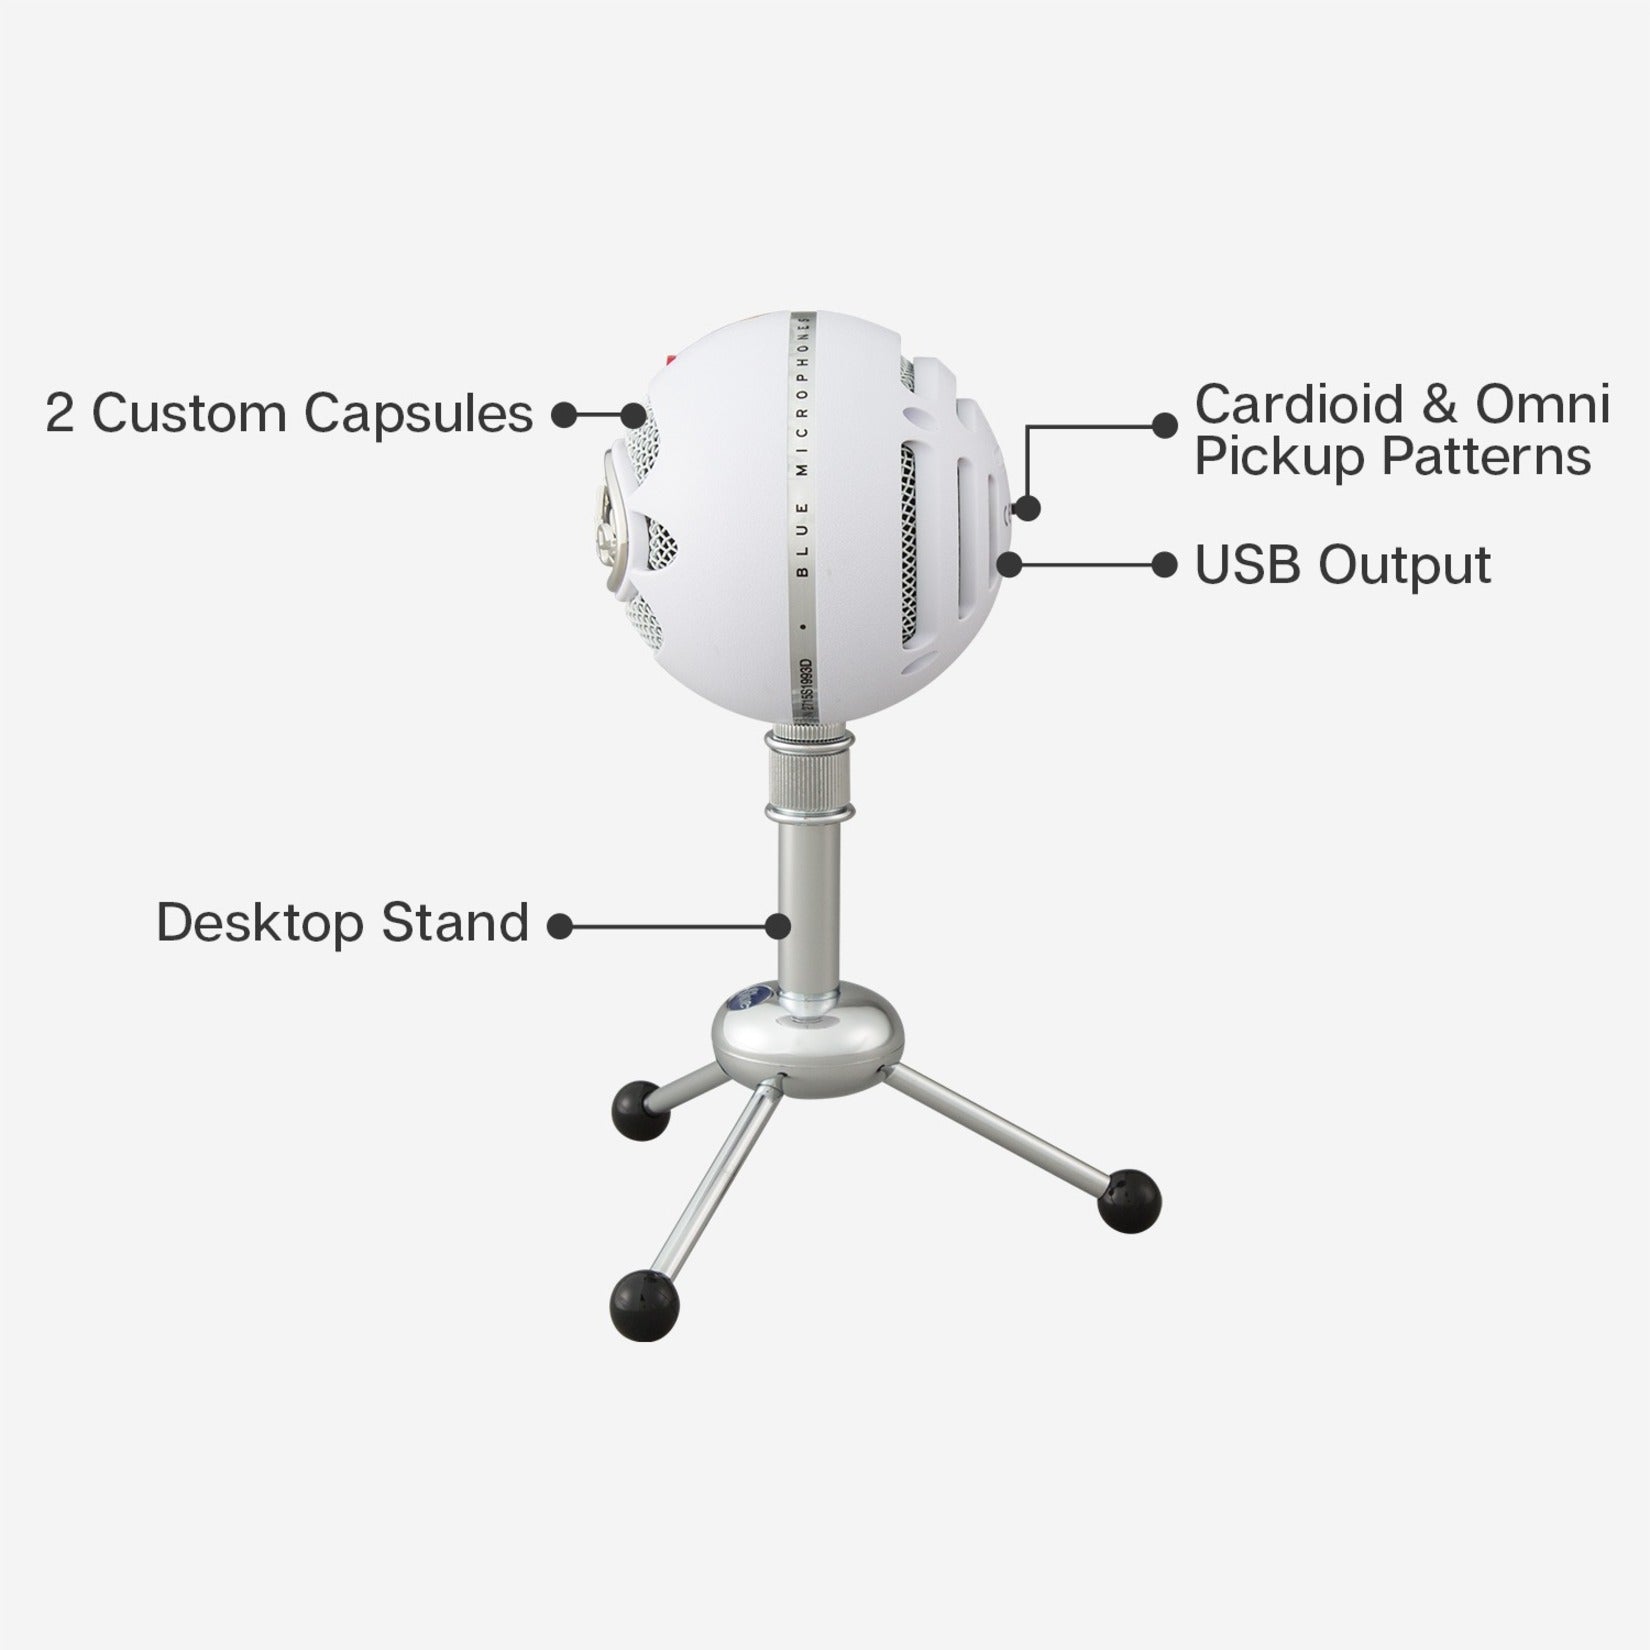 Blue 988-000073 Snowball Classic Studio-Quality USB Microphone, 2 Year Limited Warranty, Cardioid & Omni-directional Polar Pattern, Stand Mountable, Condenser Technology